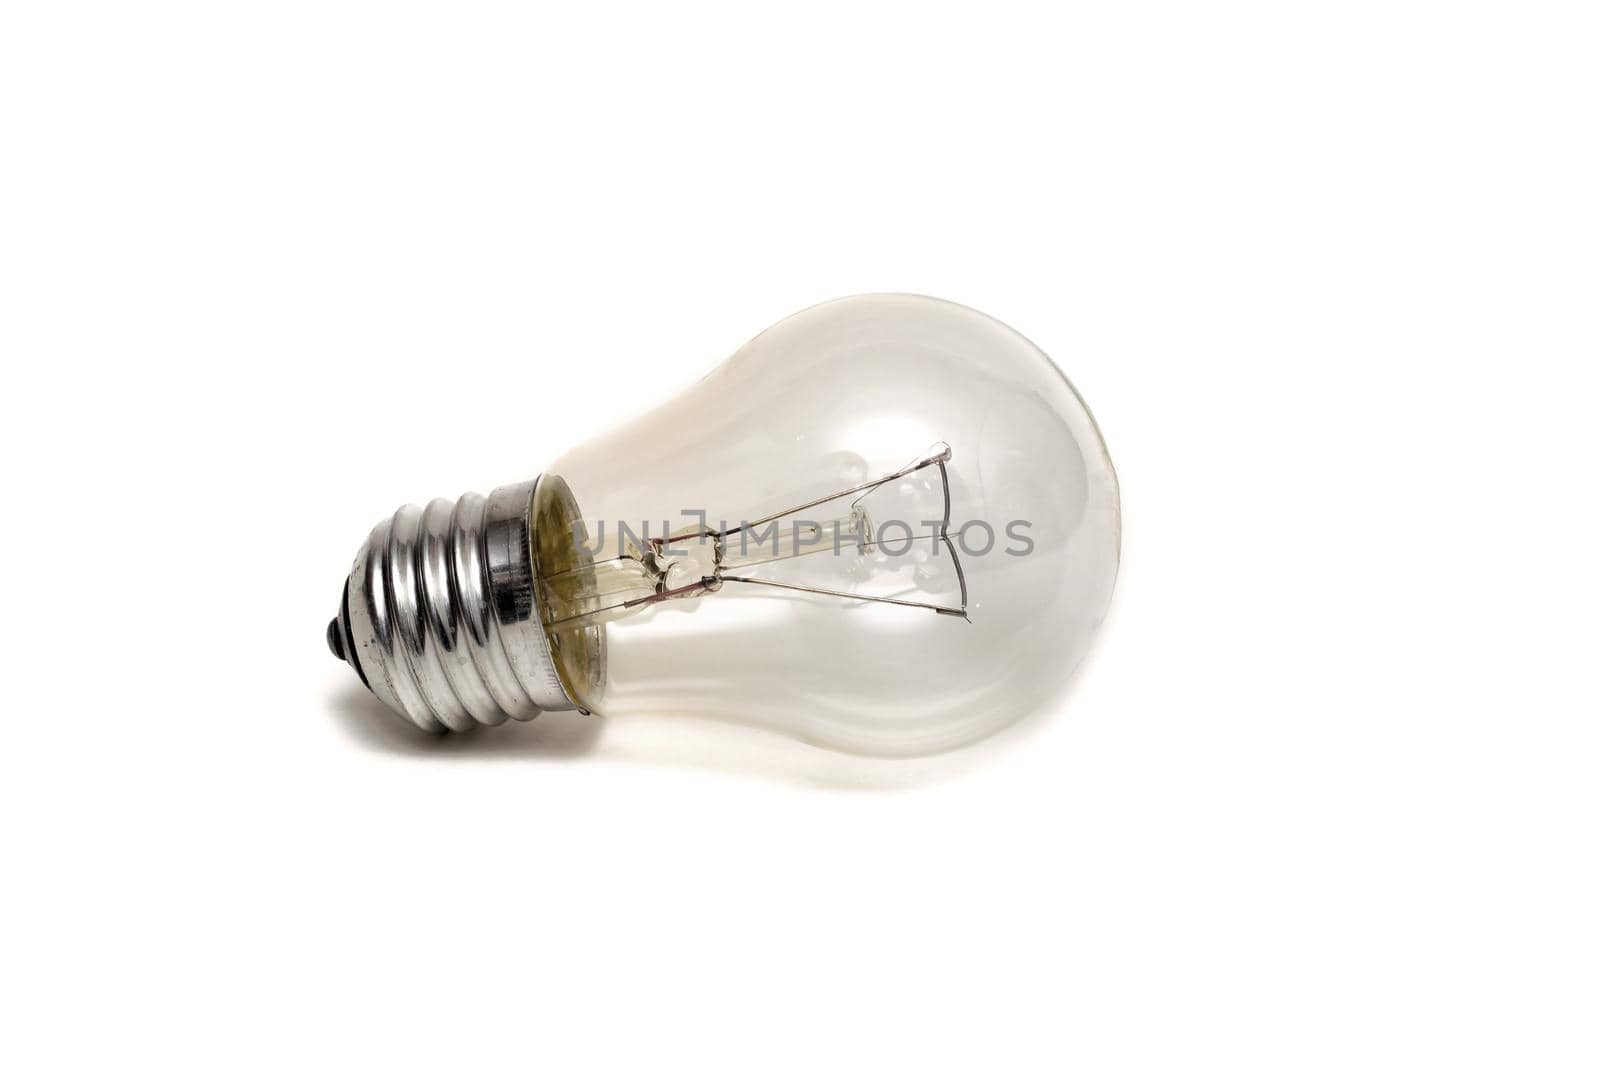 The Glass bulb close up, isolate on a white background